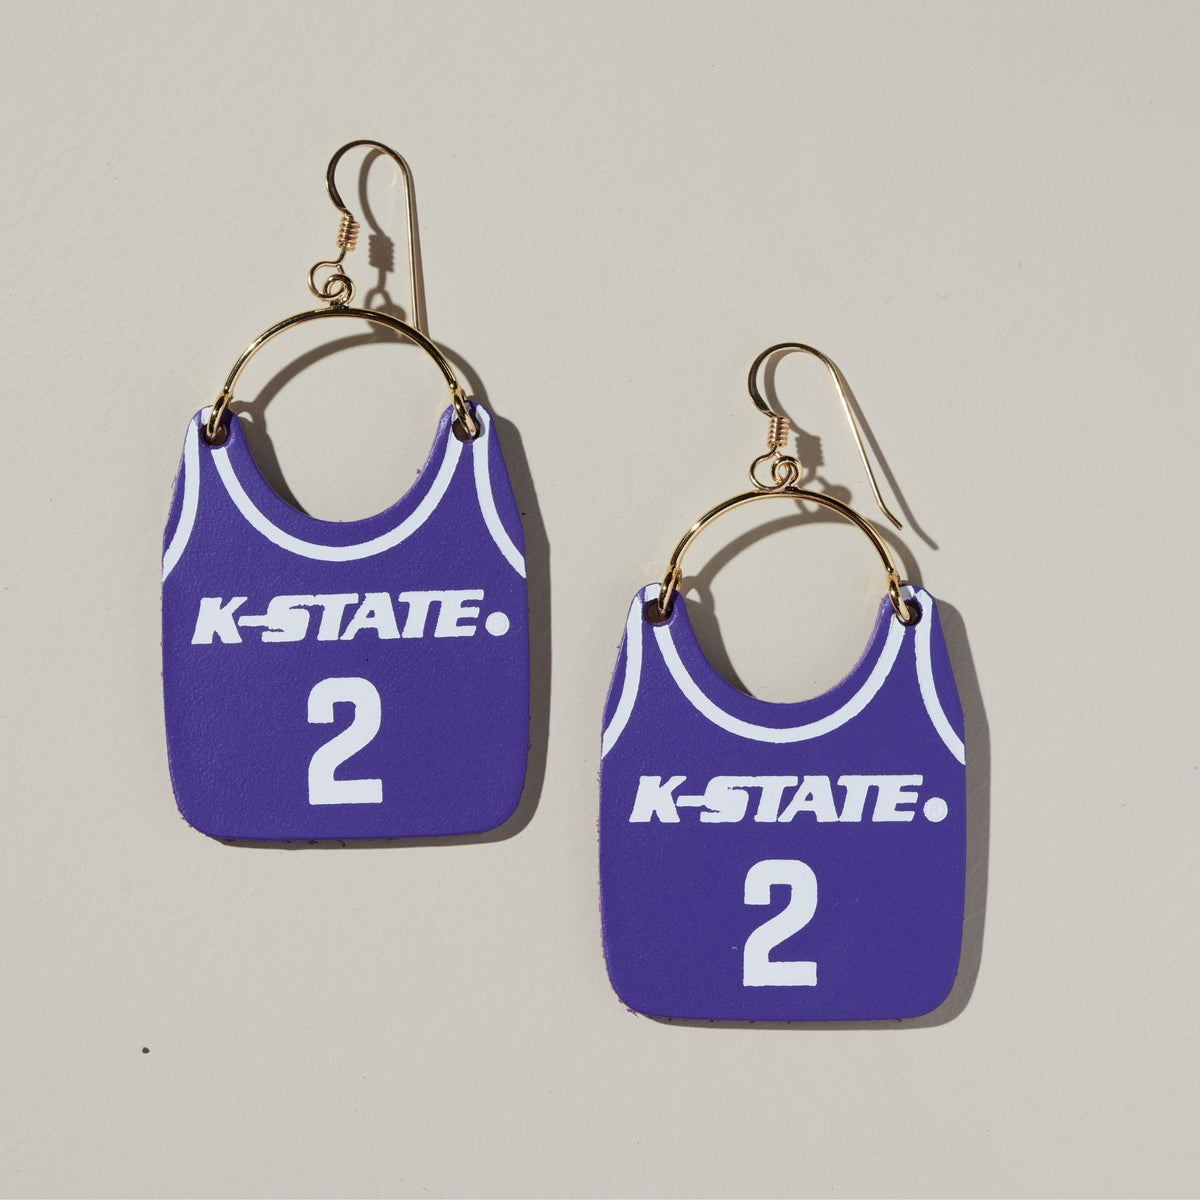 K-State #2 Jersey Charlies